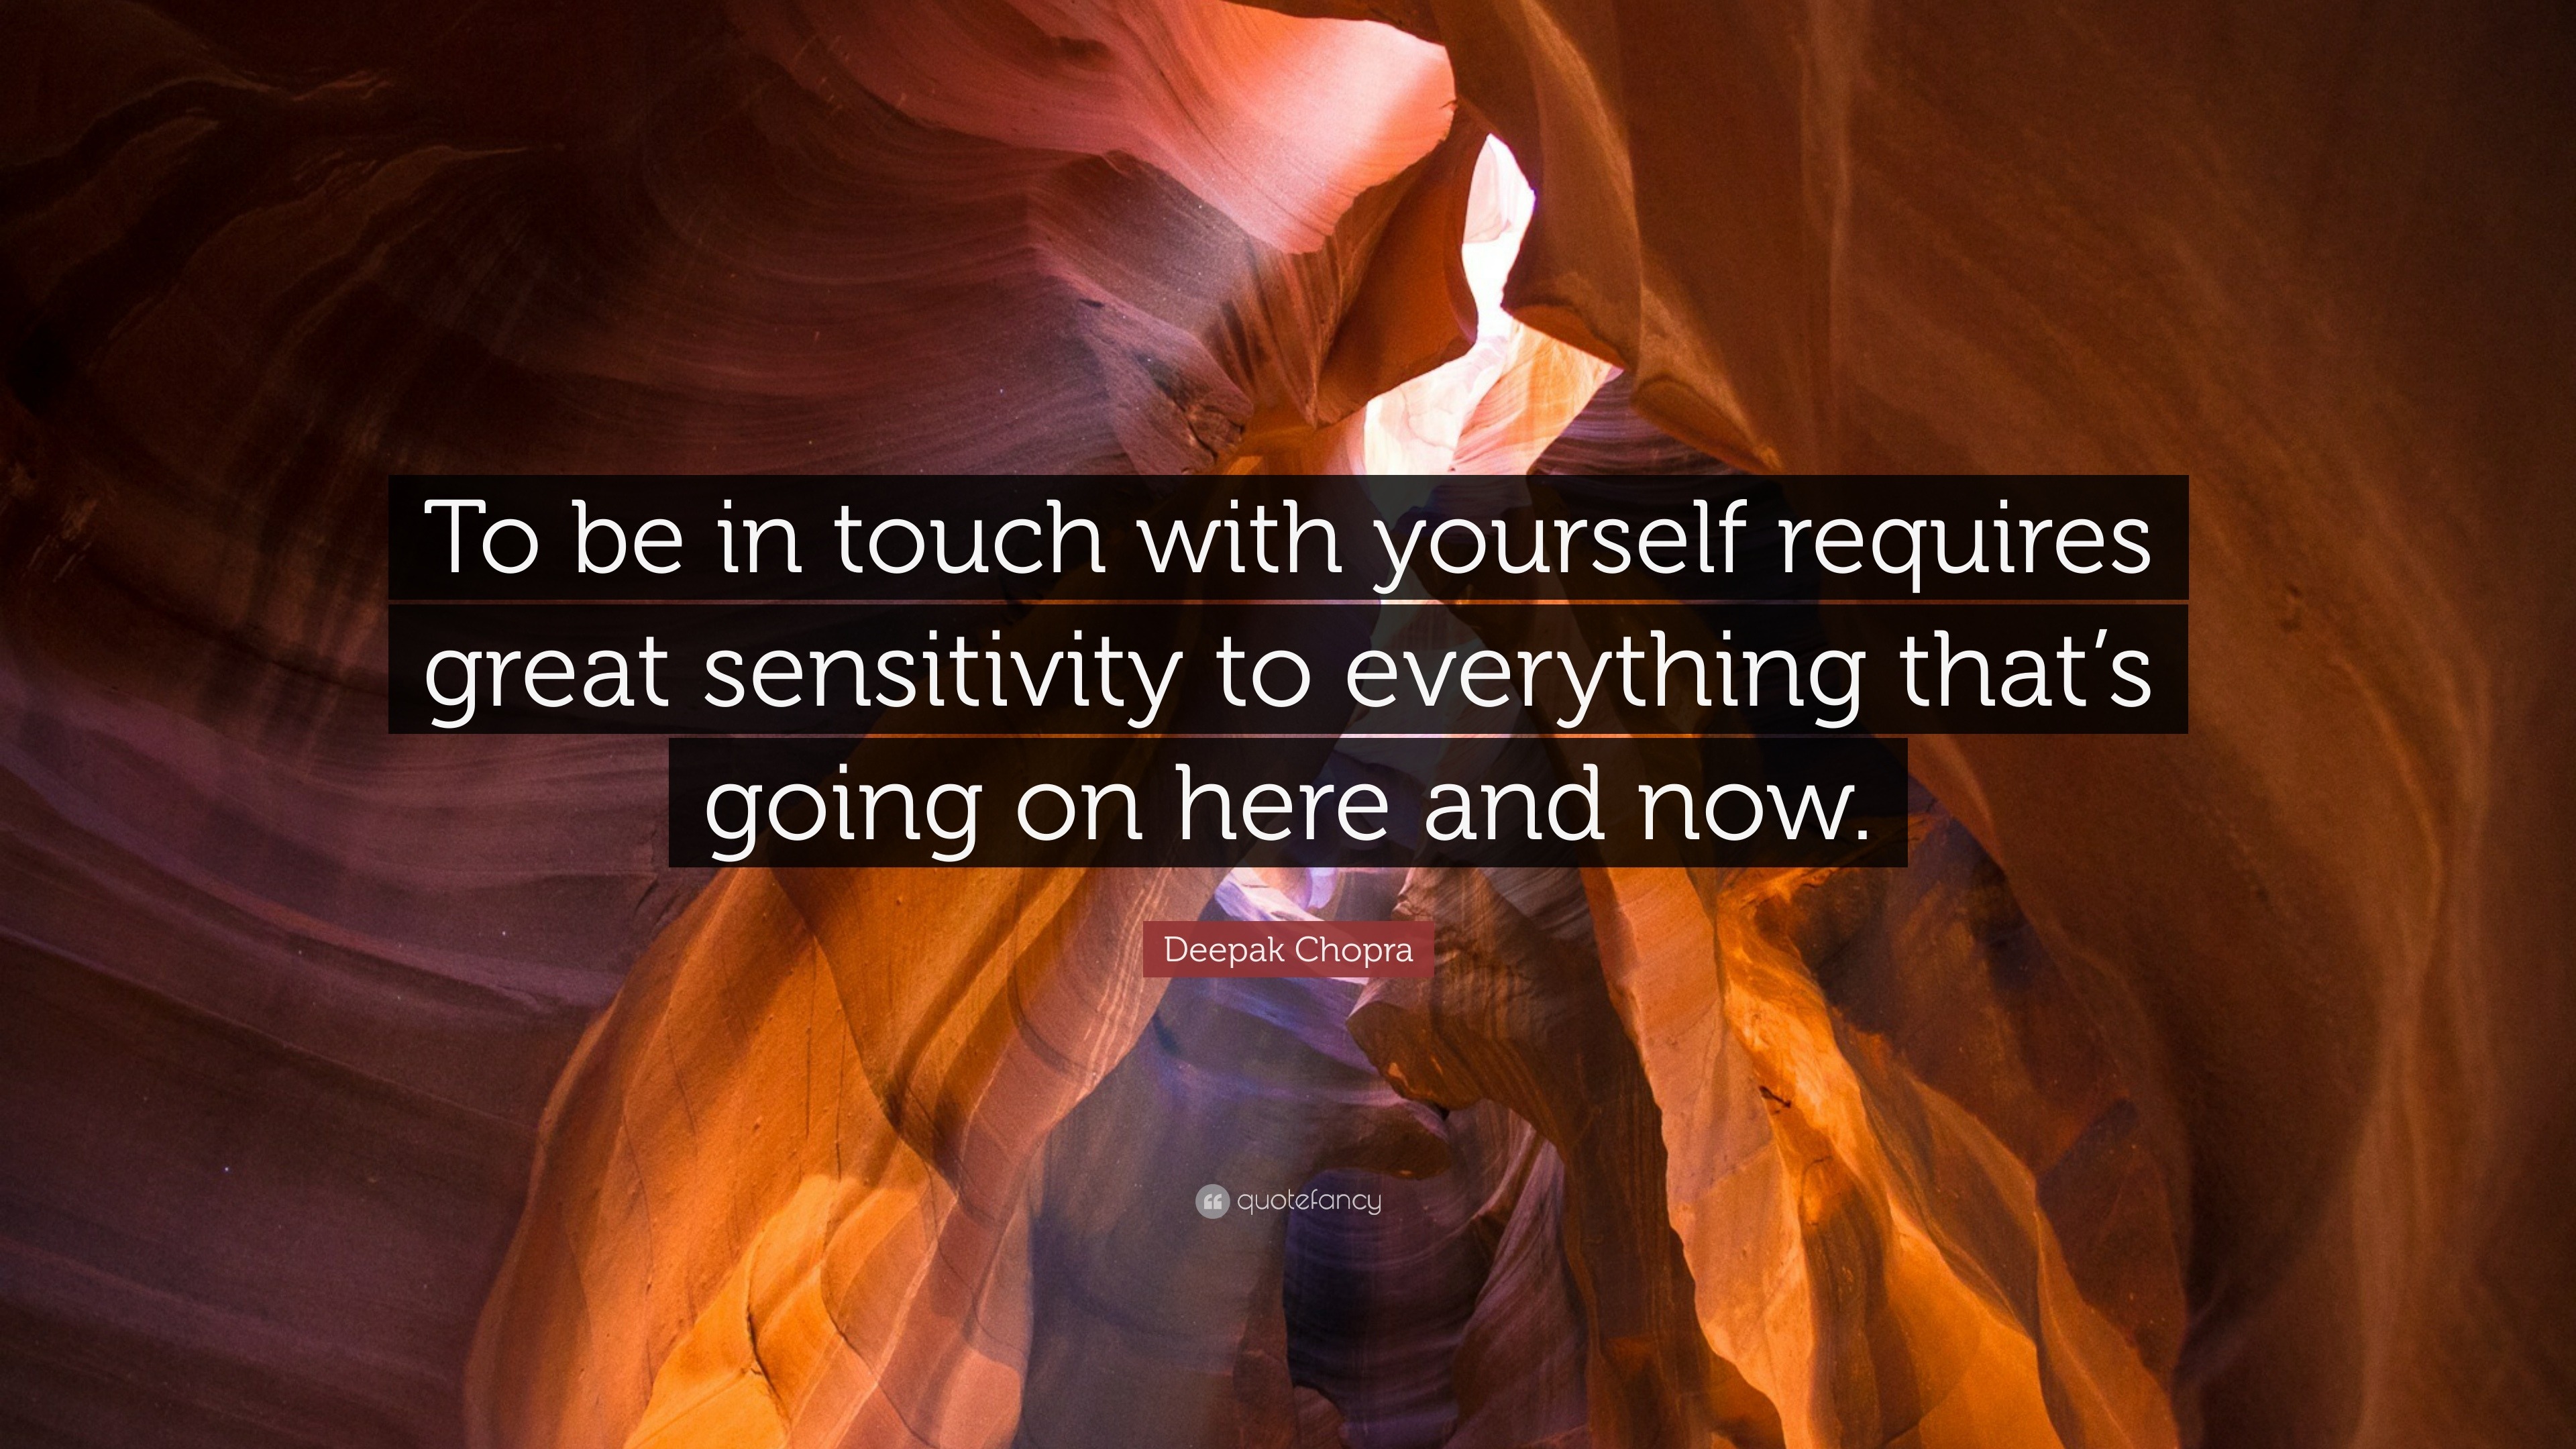 getting in touch with yourself